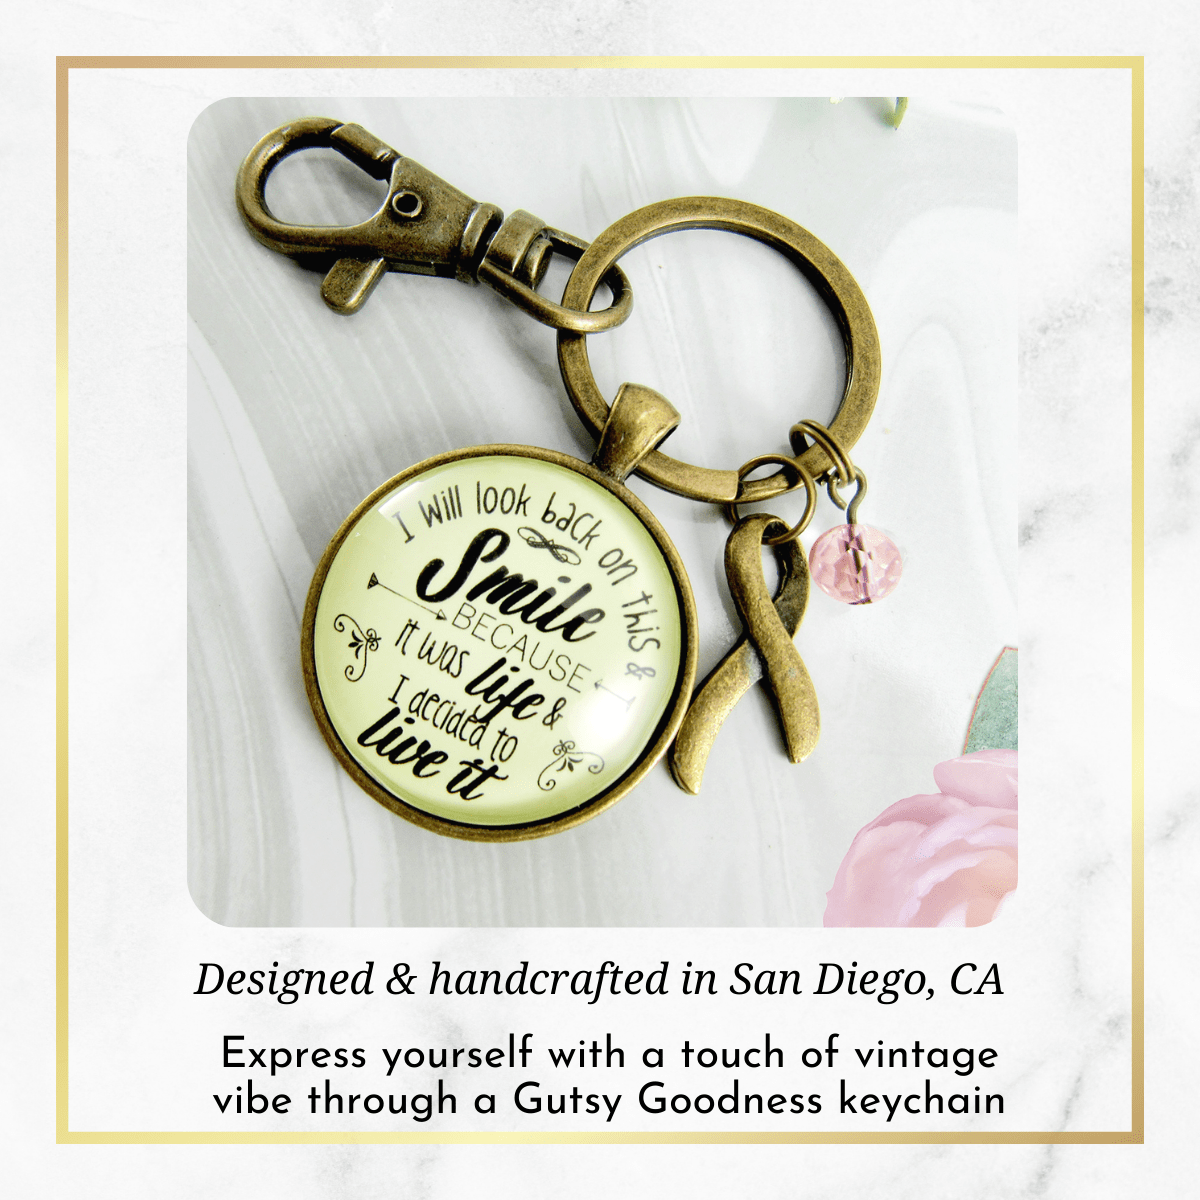 Breast Cancer Keychain I Will Look Back Life Survivor Mantra Jewelry - Gutsy Goodness Handmade Jewelry;Breast Cancer Keychain I Will Look Back Life Survivor Mantra Jewelry - Gutsy Goodness Handmade Jewelry Gifts